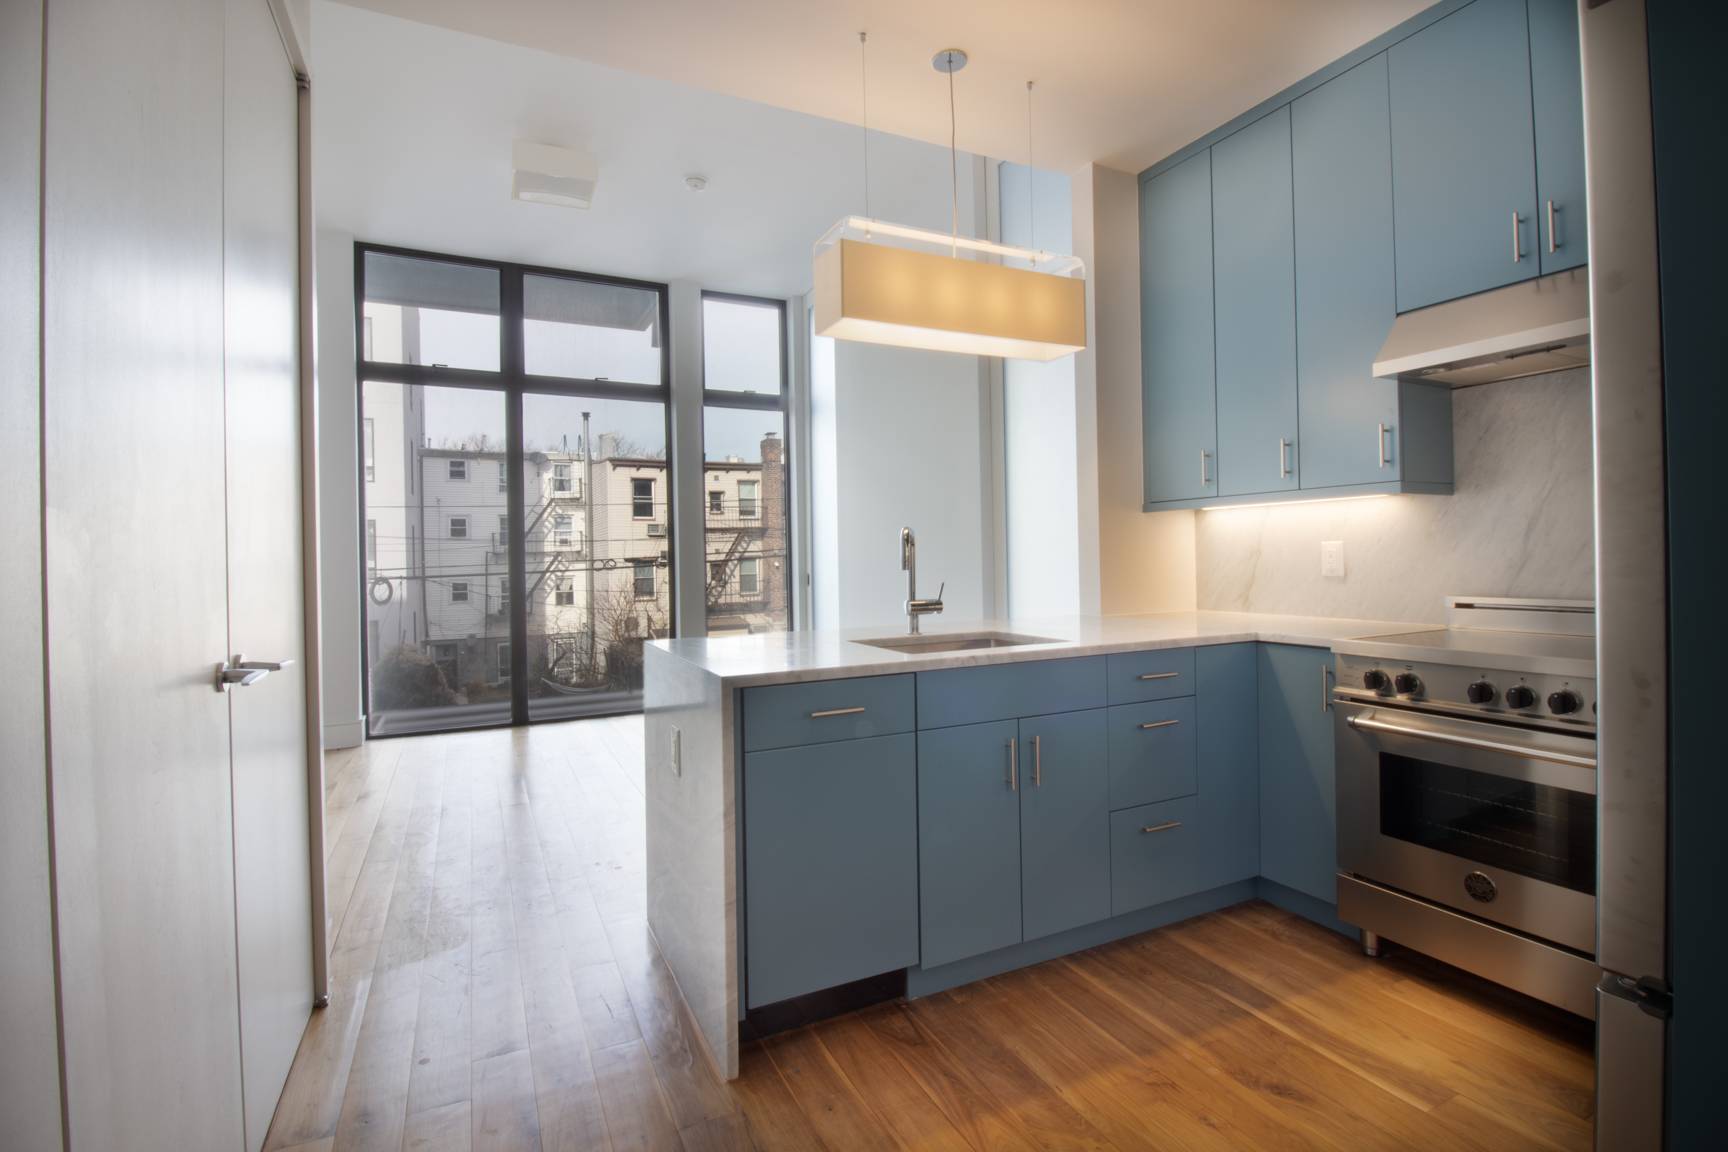 Welcome to 237 Devoe Street, a captivating addition to the East Williamsburg neighborhood.